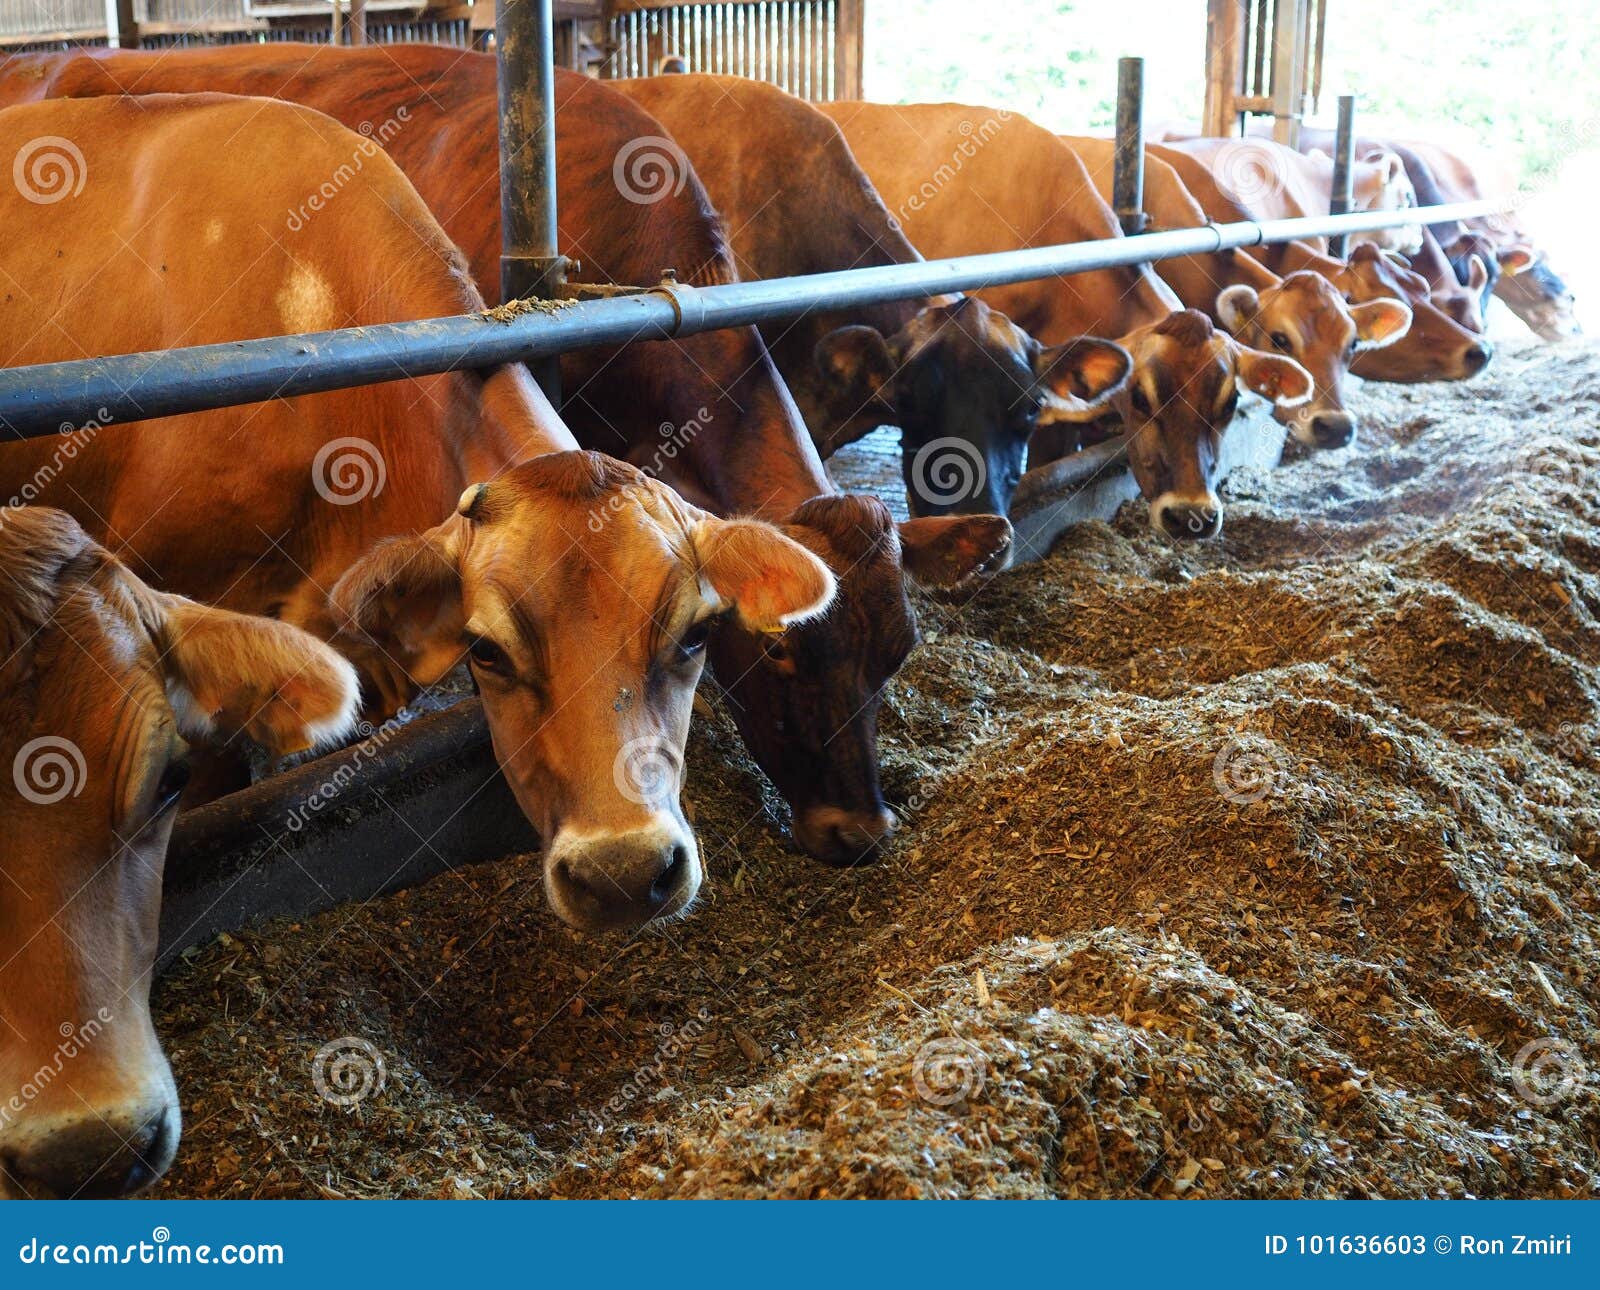 modern farm cowshed with cows